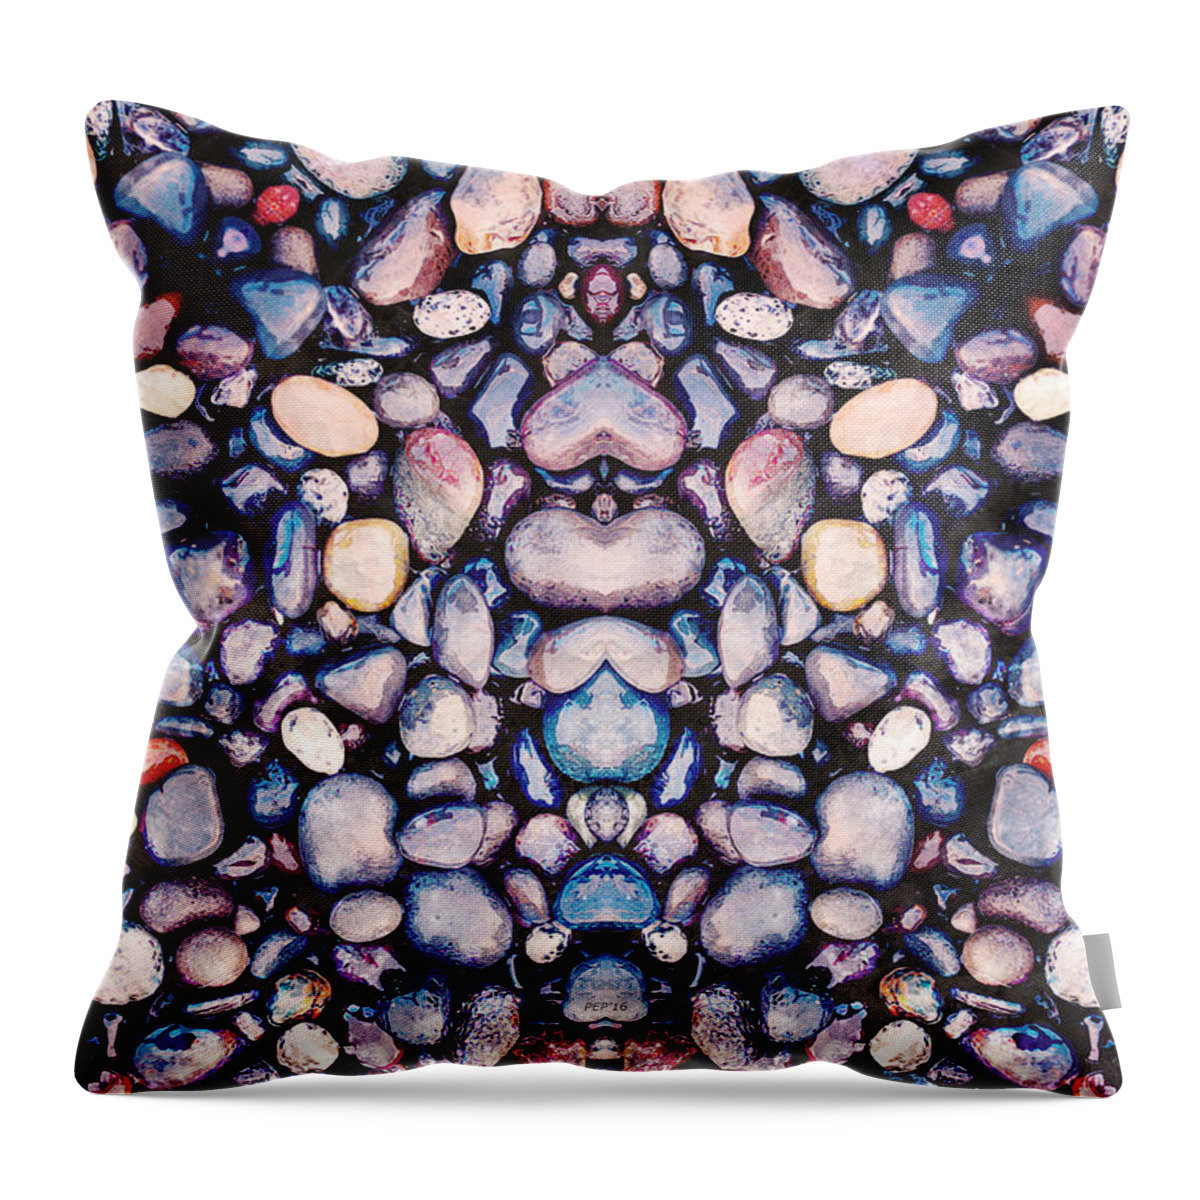 Pebbles Throw Pillow featuring the photograph Mirrored Pebbles On Beach by Phil Perkins